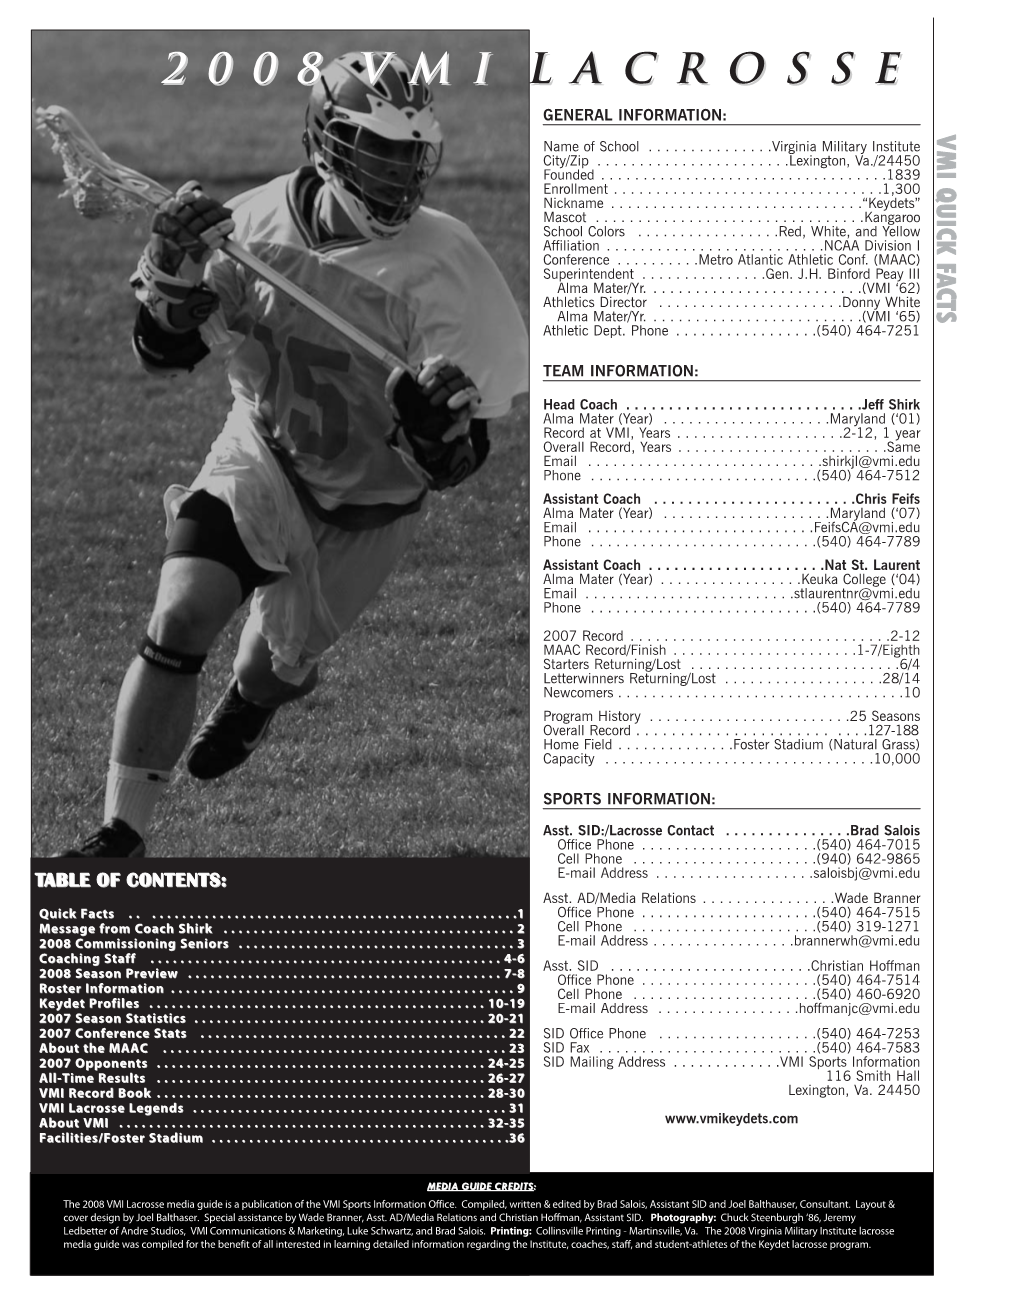 2008 Lax Media Guide Test New:Copy of Layout 1.Qxd